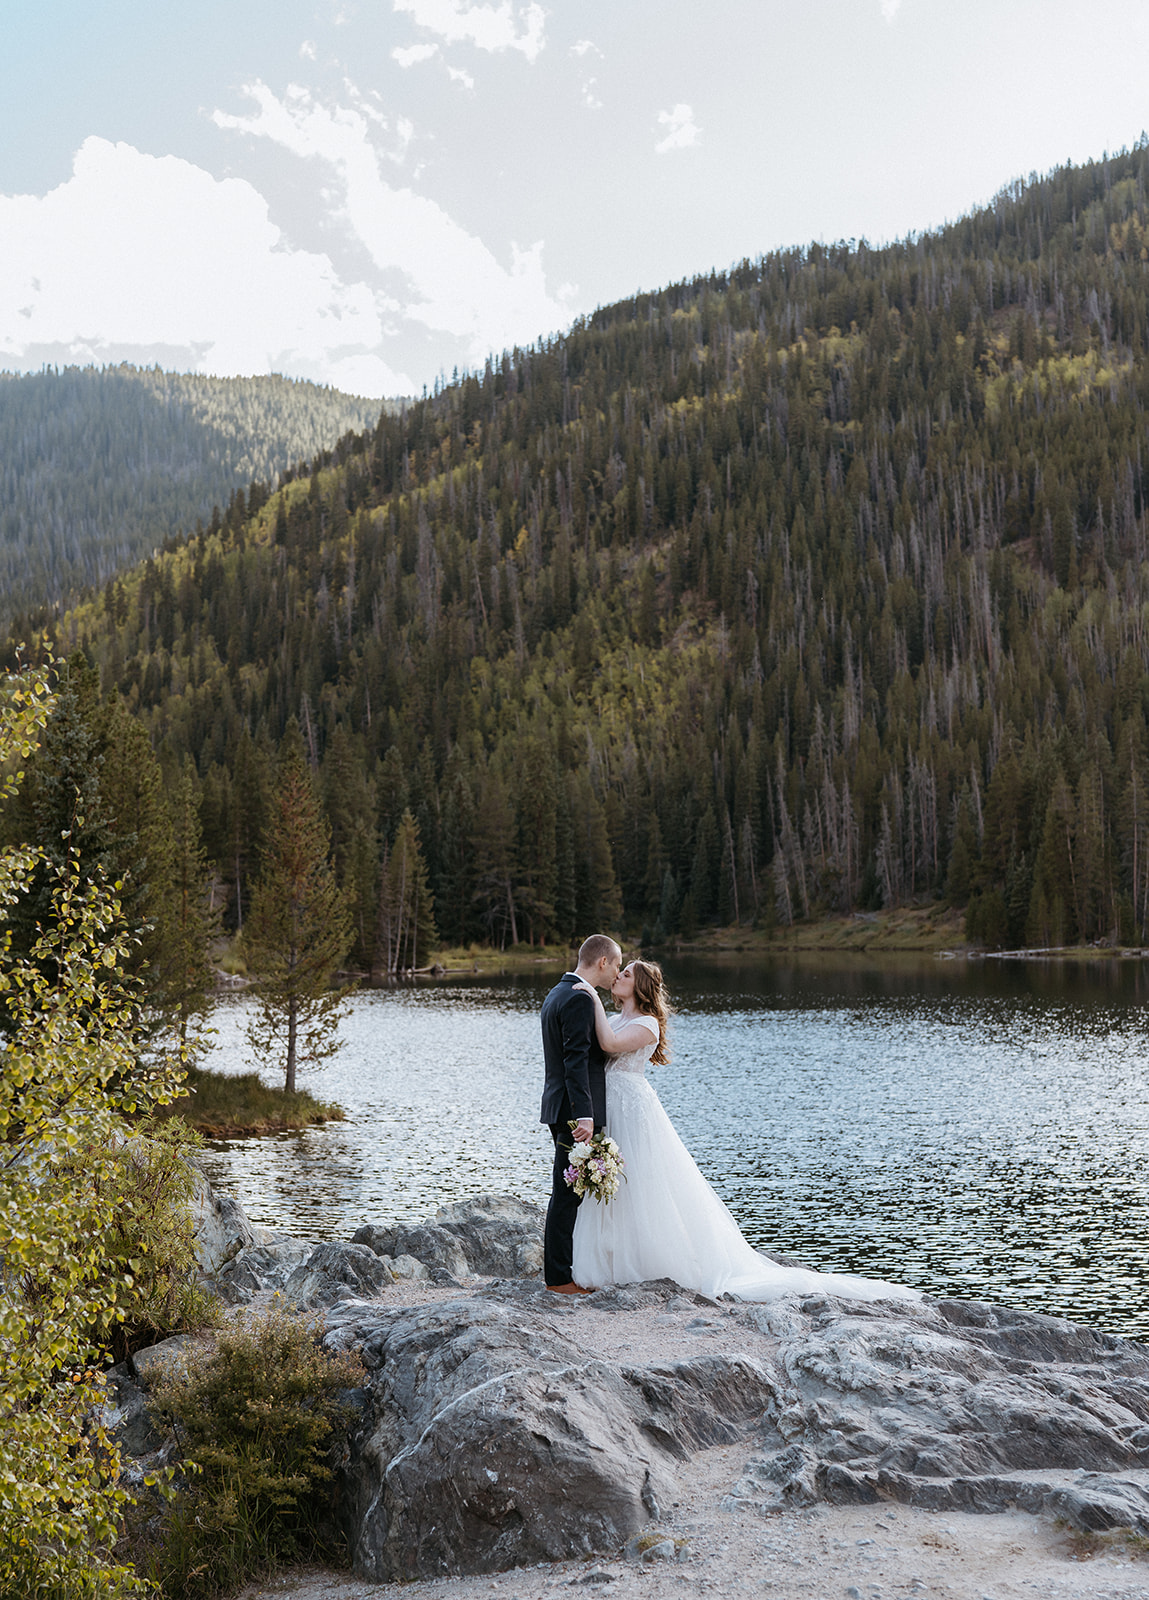 Newlyweds share a kiss on the edge of a rocky mountain lake Colorado Adventure Elopement